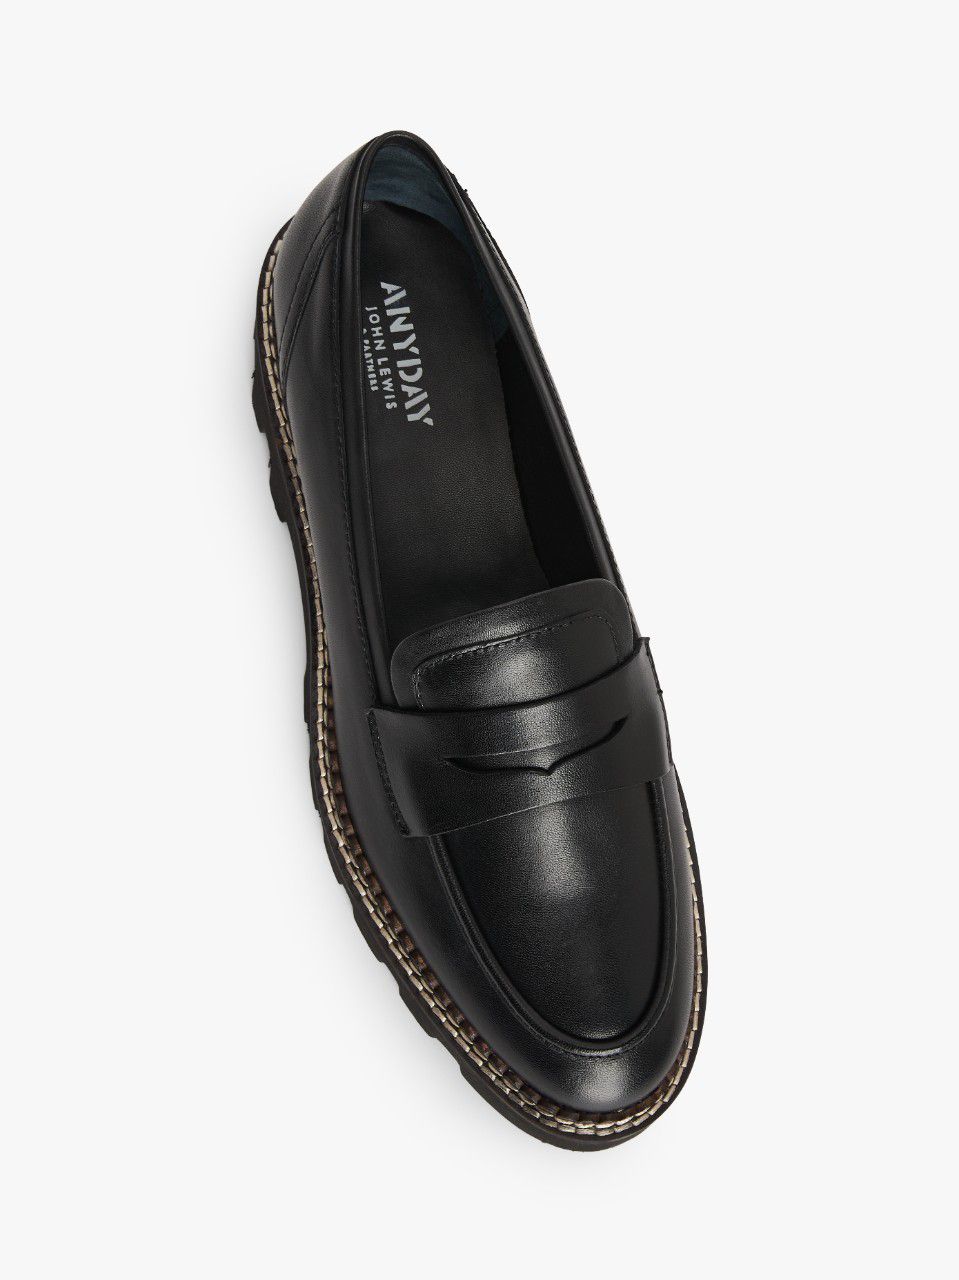 John Lewis ANYDAY Gryffin Leather Penny Loafers, Black, 6